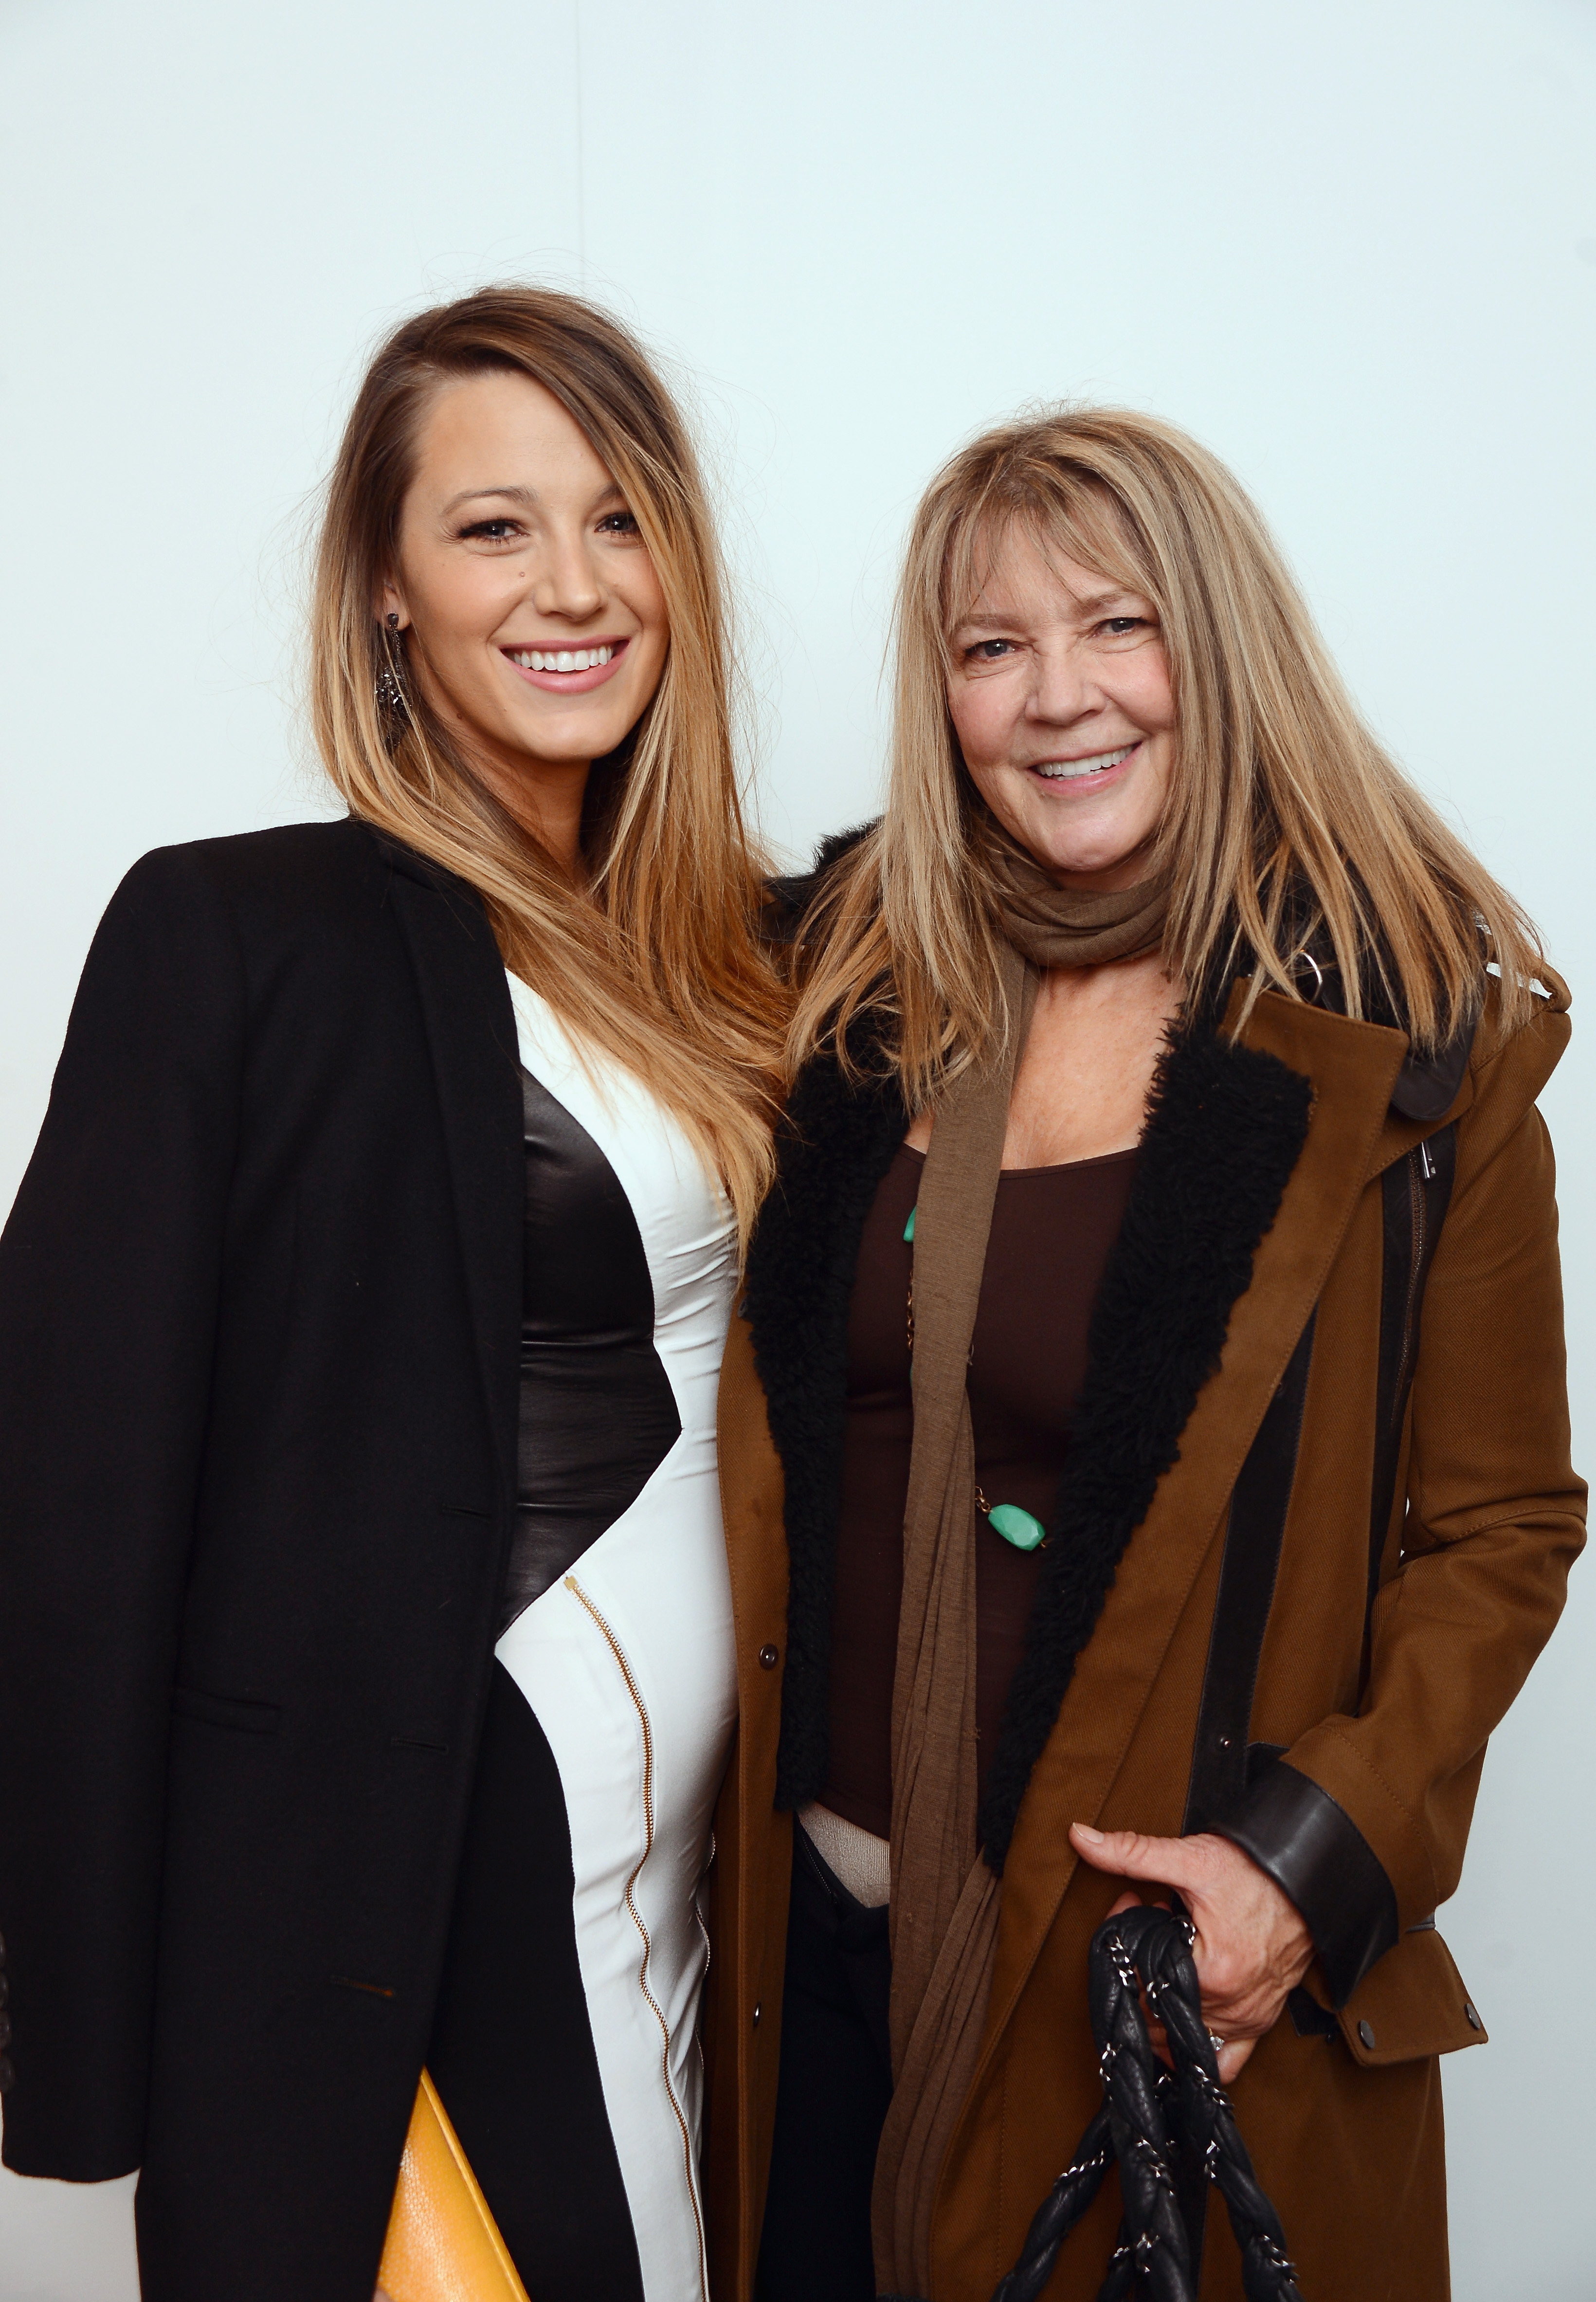 Blake Lively and Elaine Lively pose backstage at the Mercedes-Benz Fashion Week Fall in New York City, on February 12, 2015. | Source: Getty Images